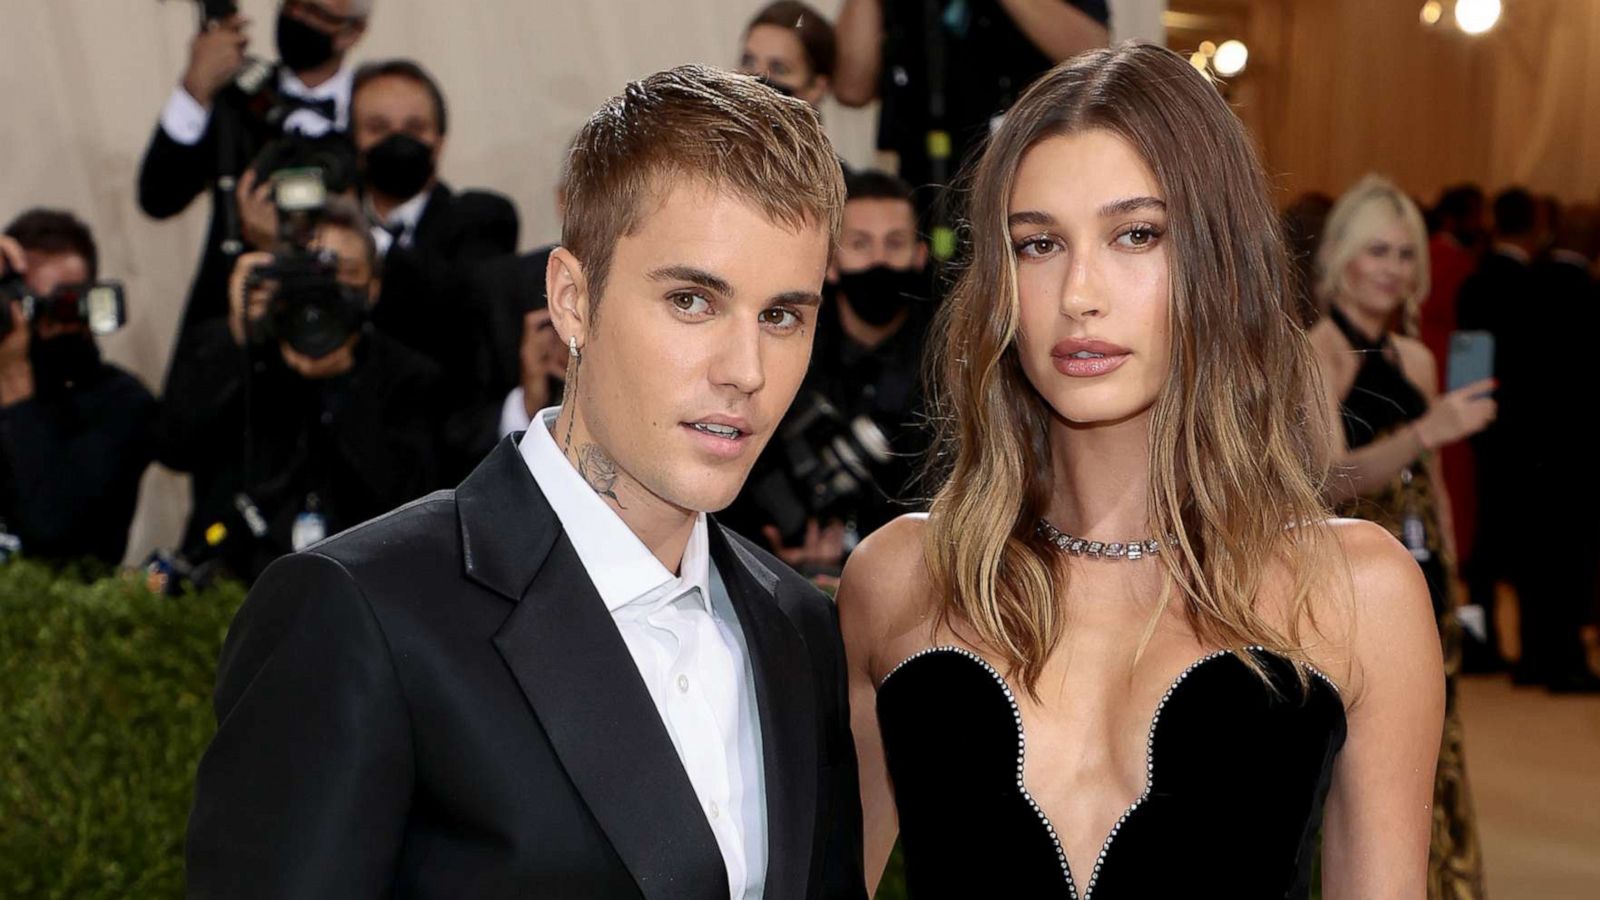 PHOTO: In this Sept. 13, 2021, file photo, Justin Bieber and Hailey Bieber attend The 2021 Met Gala in New York.